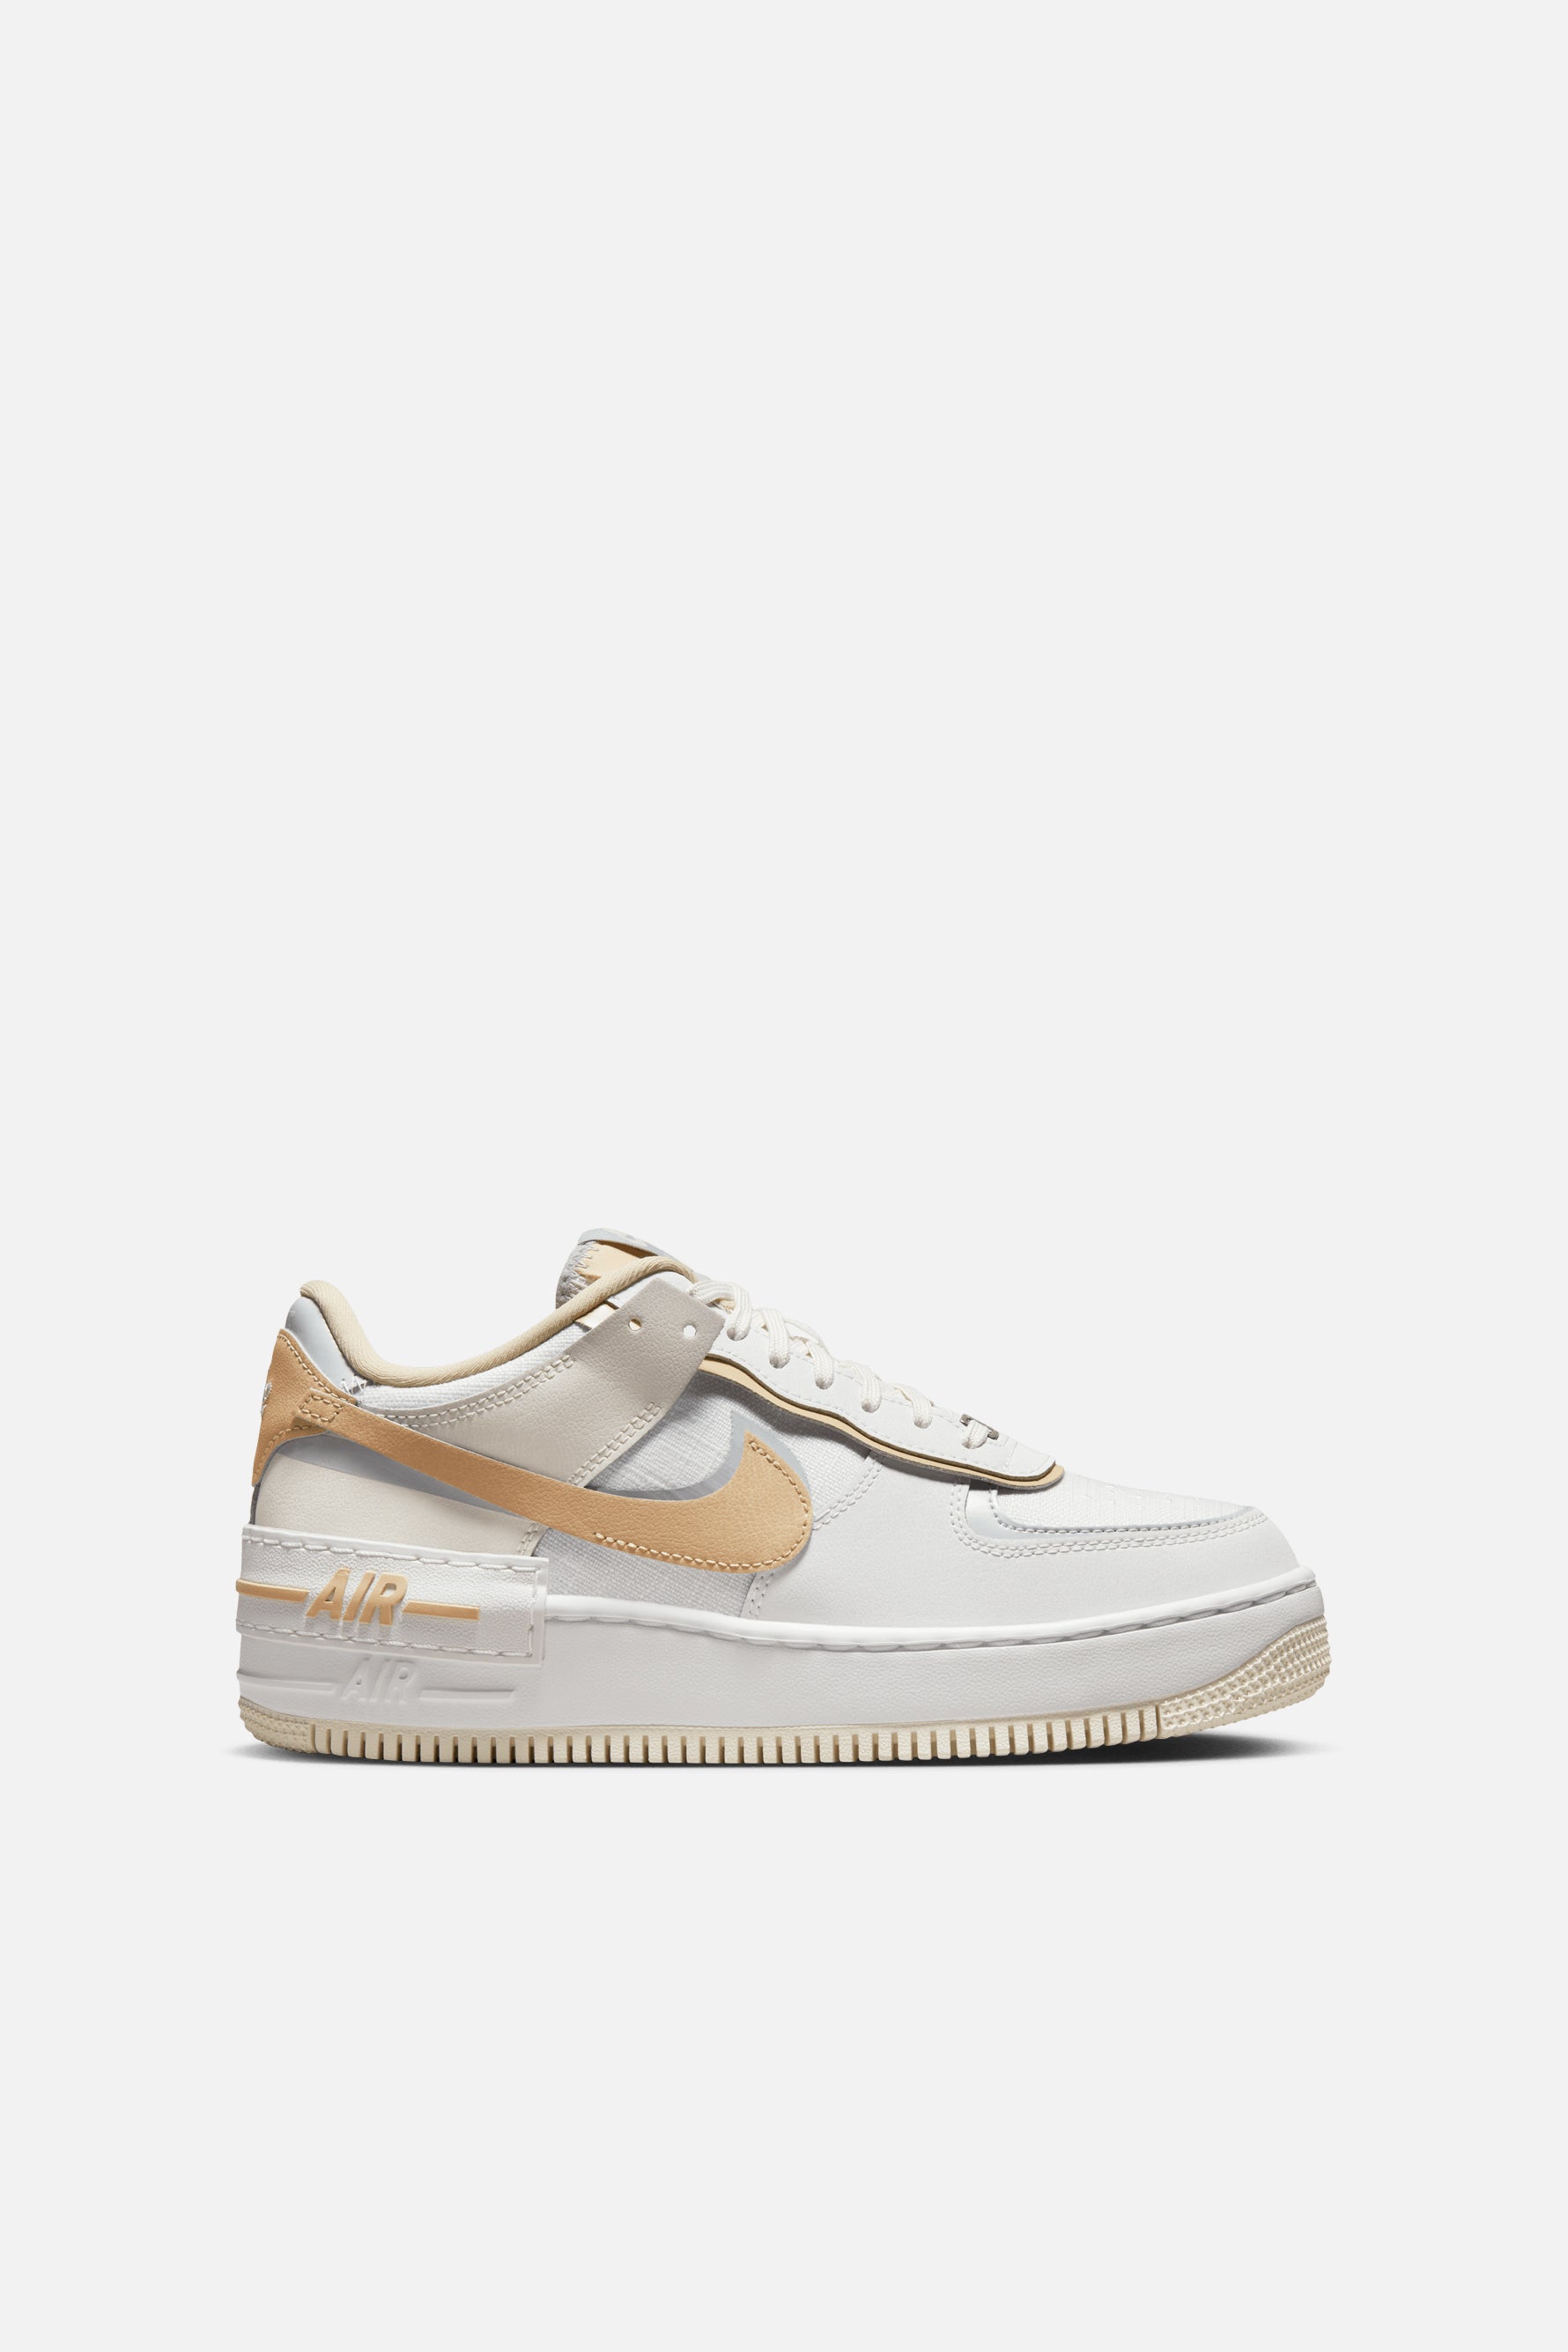 Size+11.5+-+Nike+Air+Force+1+Low+OFF-WHITE+University+Gold+Metallic+Silver  for sale online